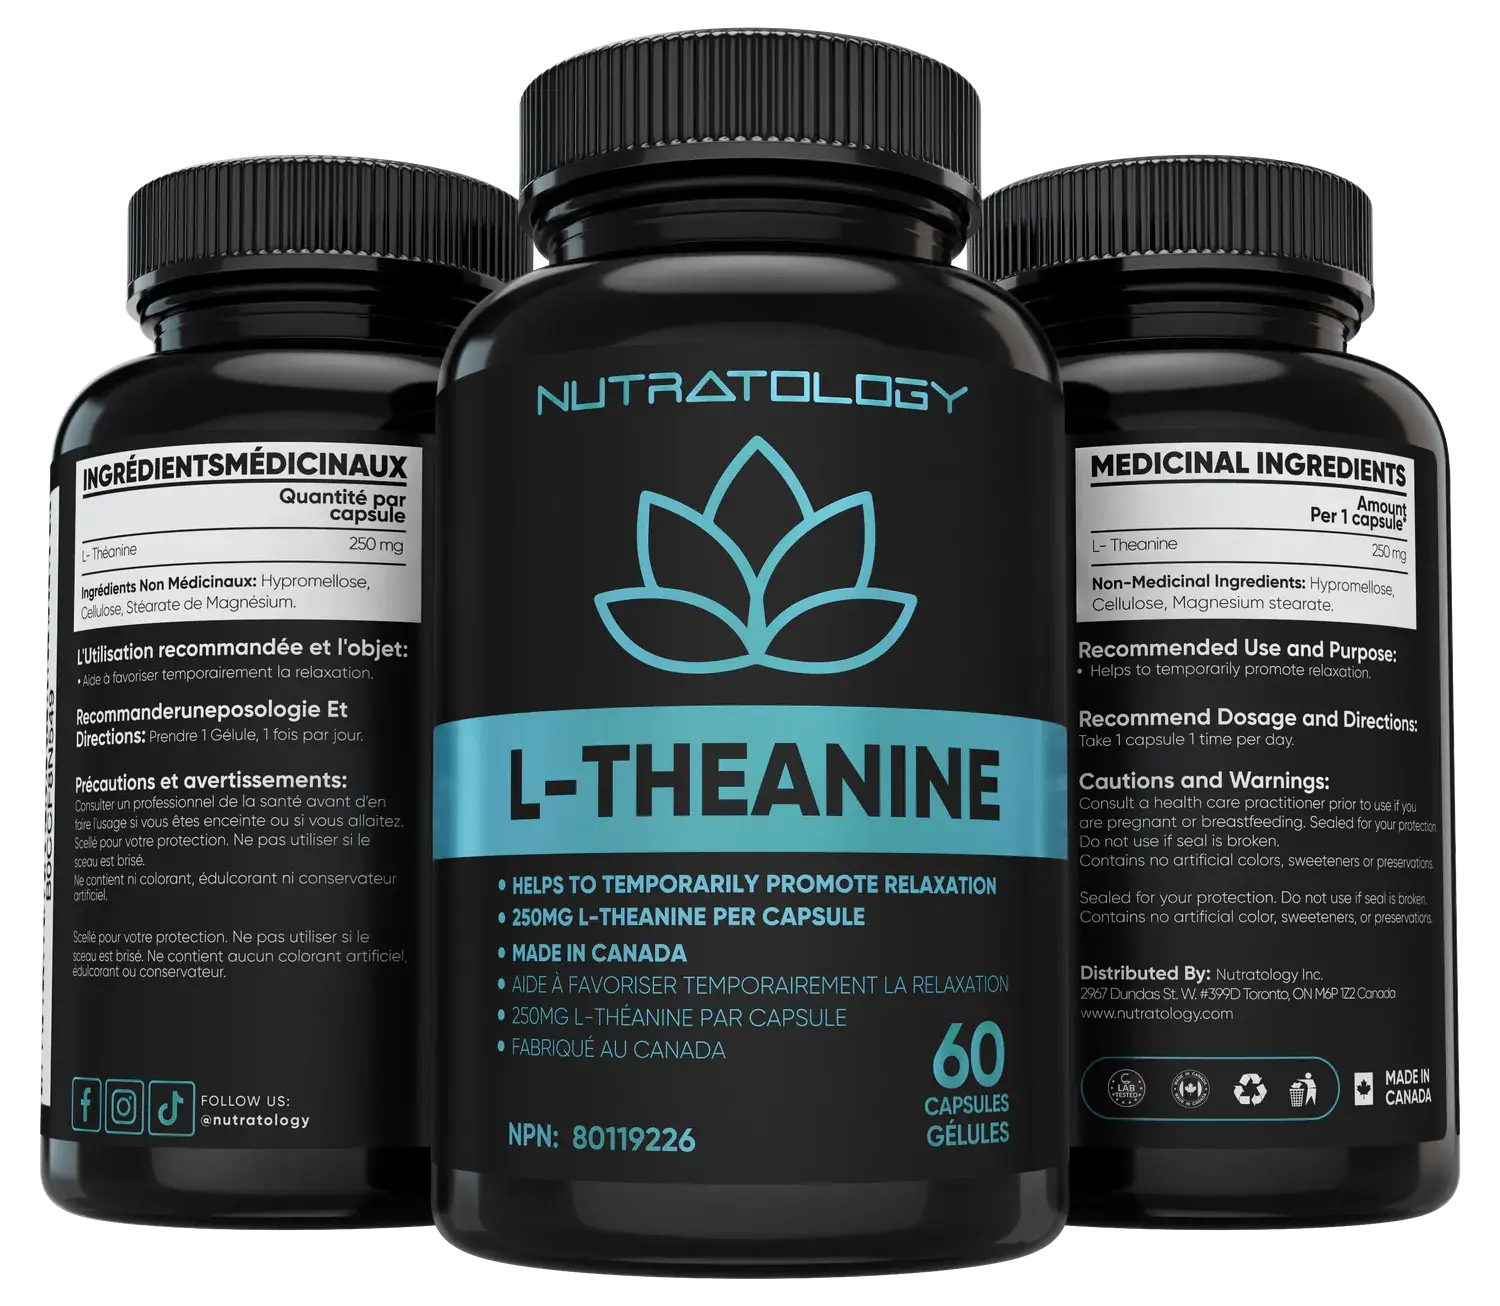 Nutratology premium  L-Theanine capsules for  vitality and lasting energy